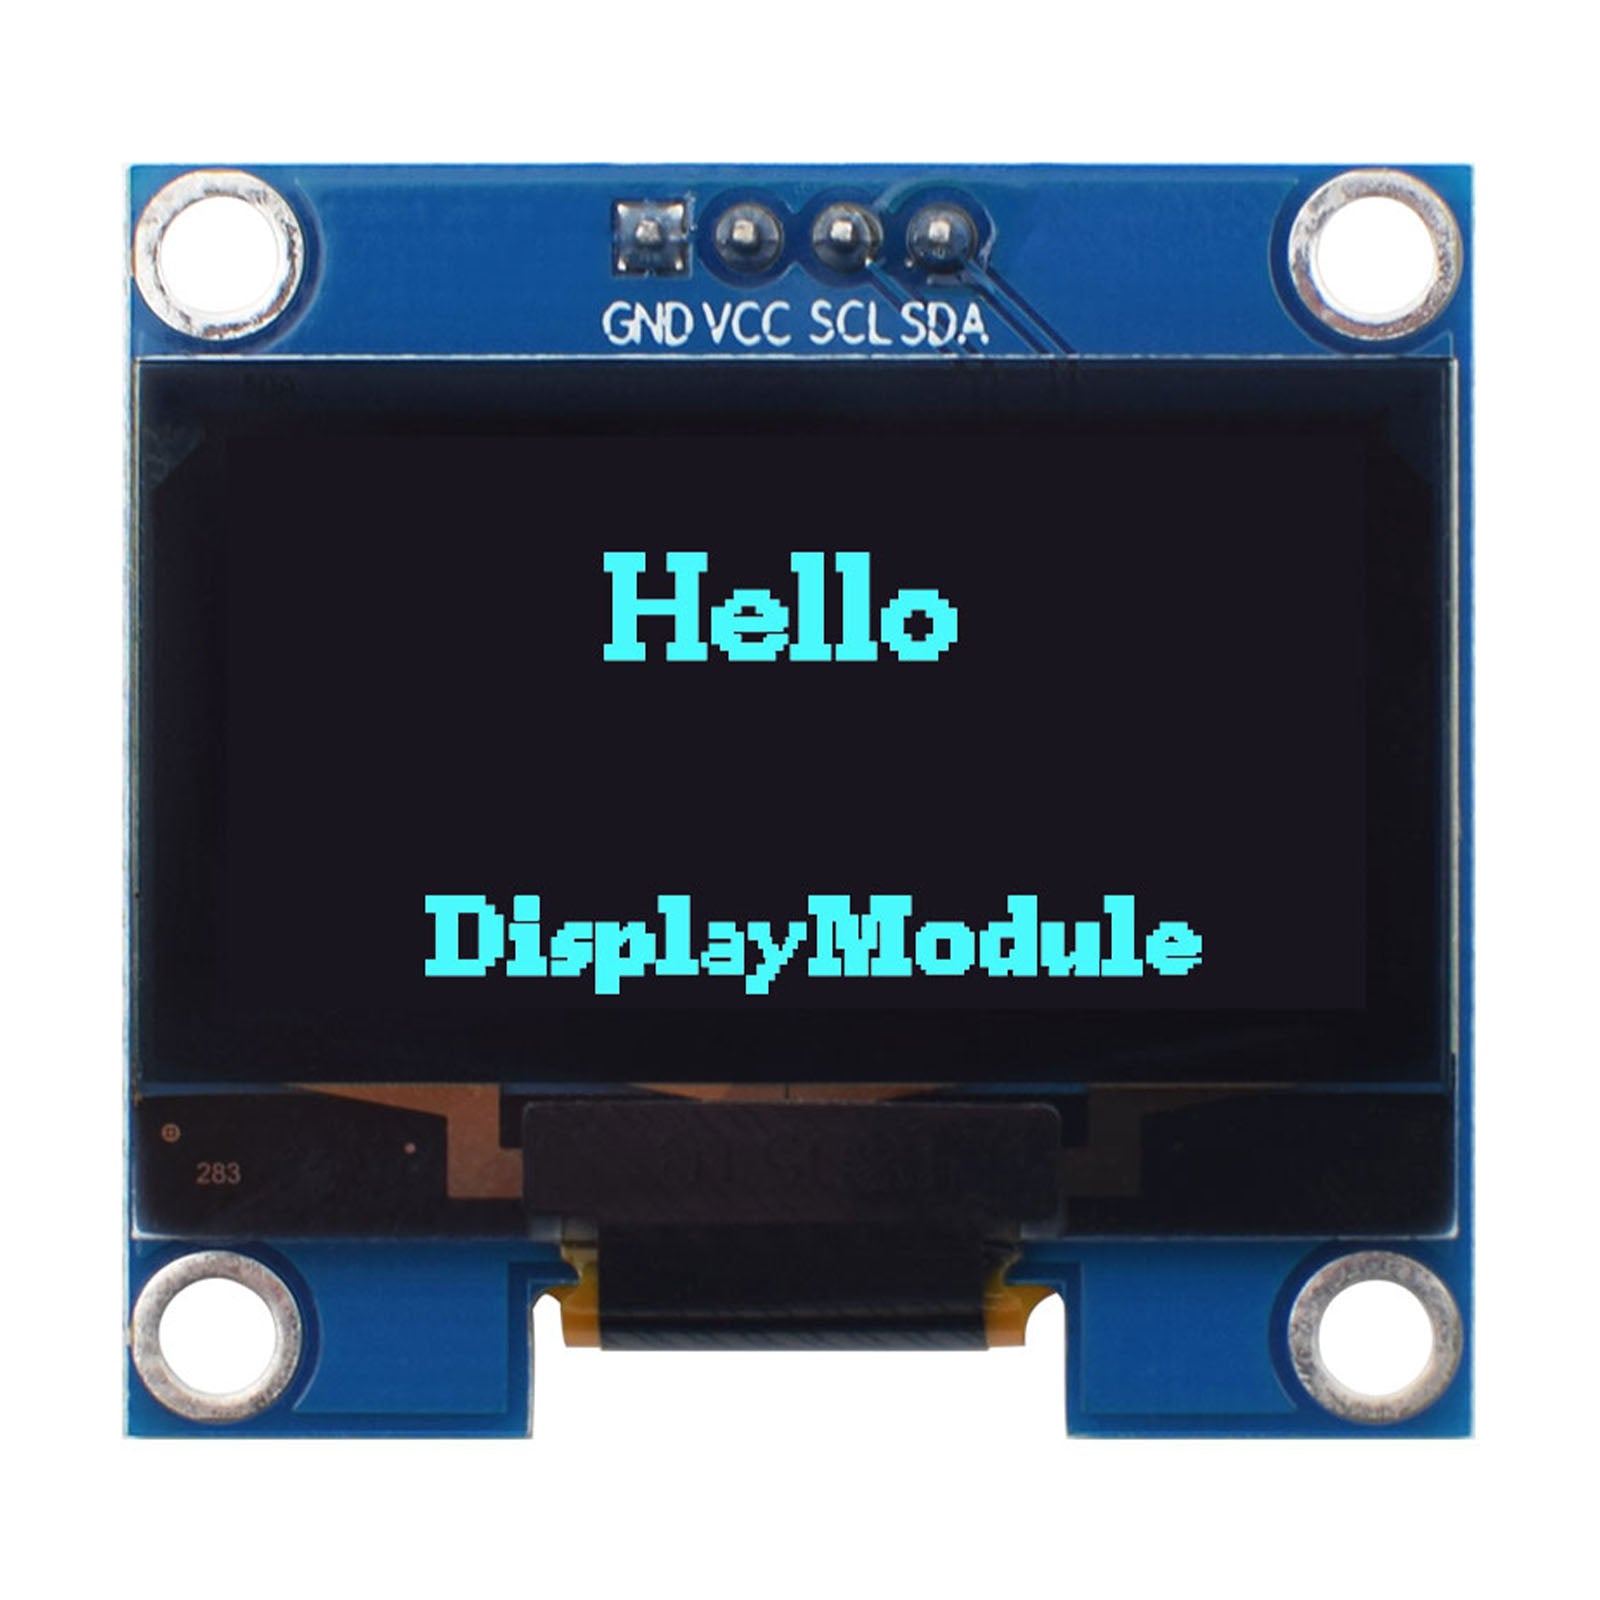 1.3-inch blue OLED graphic display module showing 'hello displaymodule'